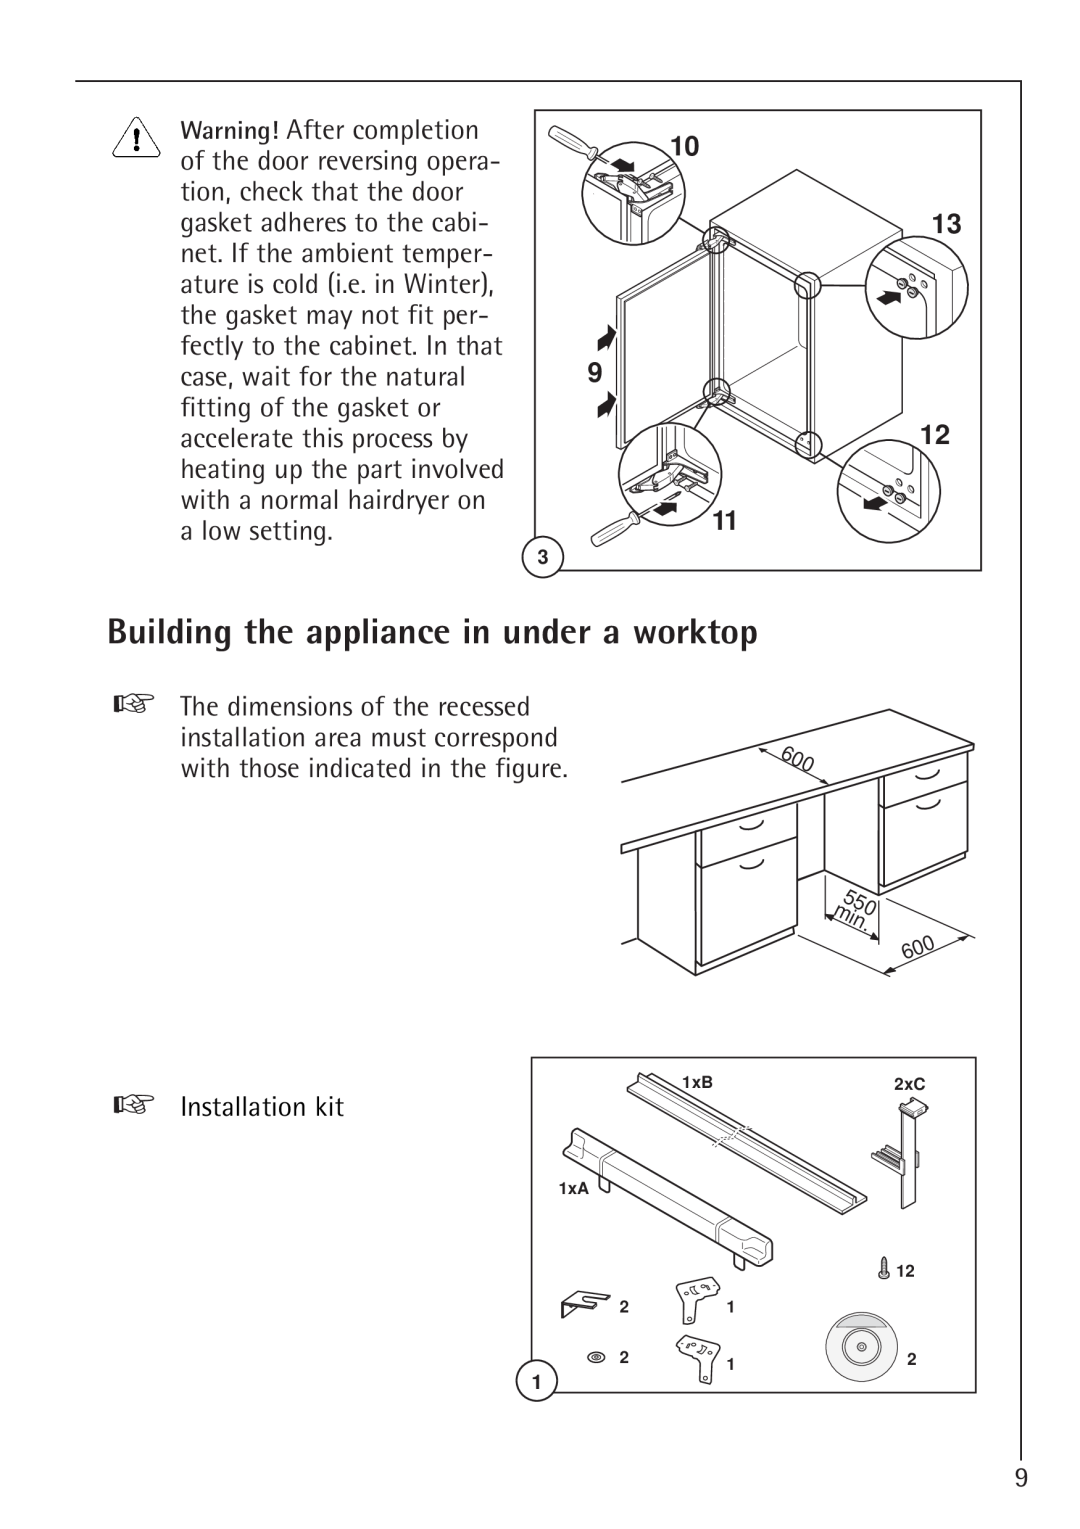 Electrolux 66050i Building the appliance in under a worktop, The dimensions of the recessed, Installation kit 